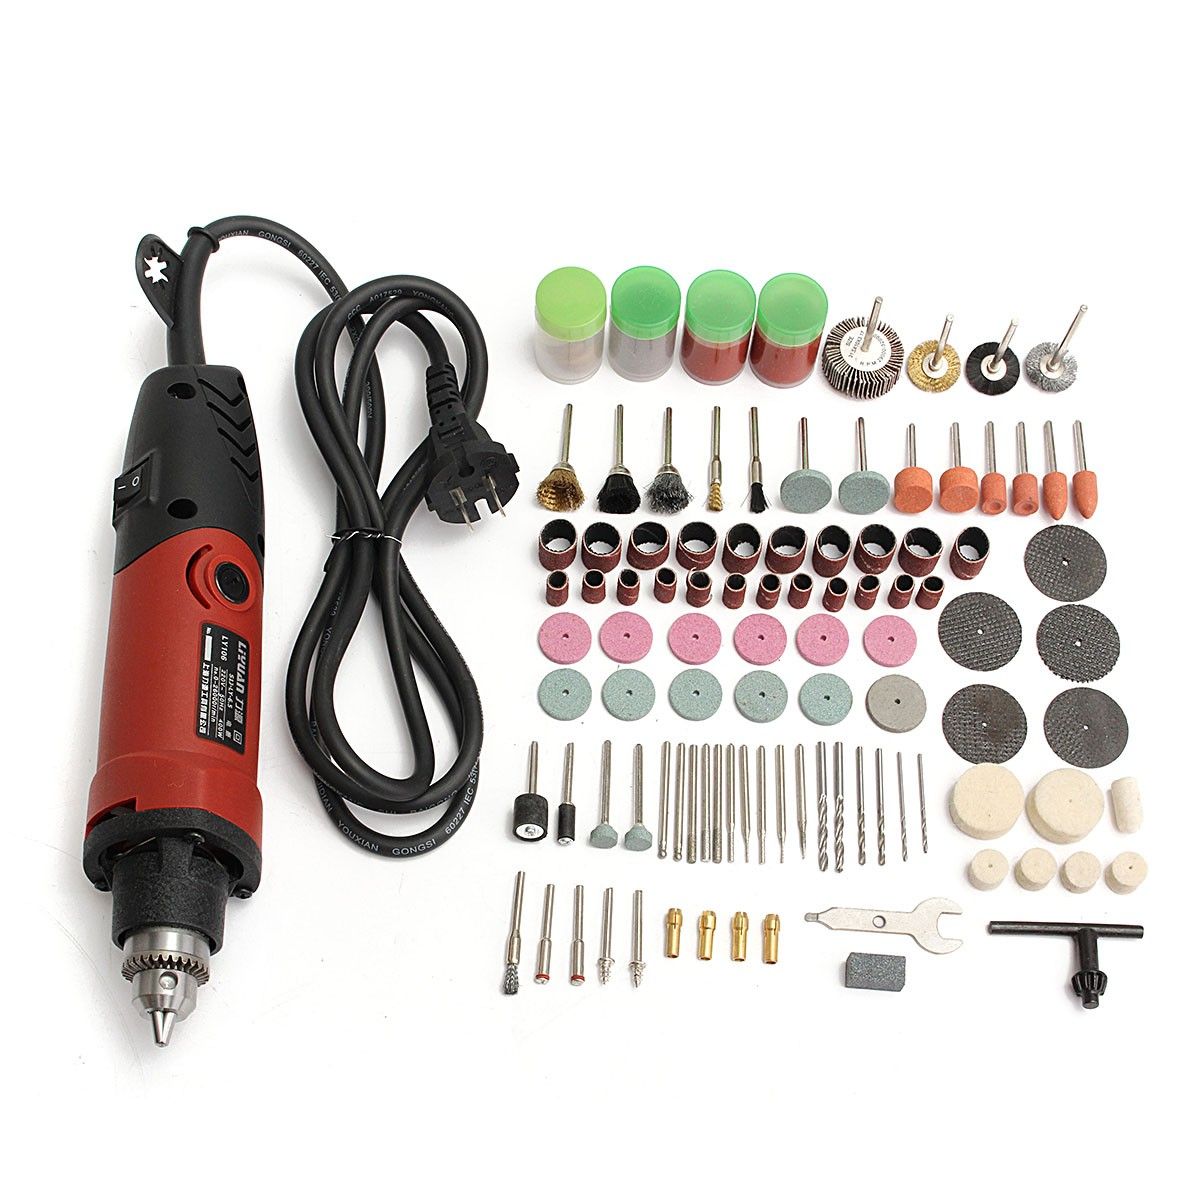 Drillpro-400W-220V-Electric-Drill-Grinder-Variable-Speed-Rotary-Tool-With-161pcs-Accessories-1101811